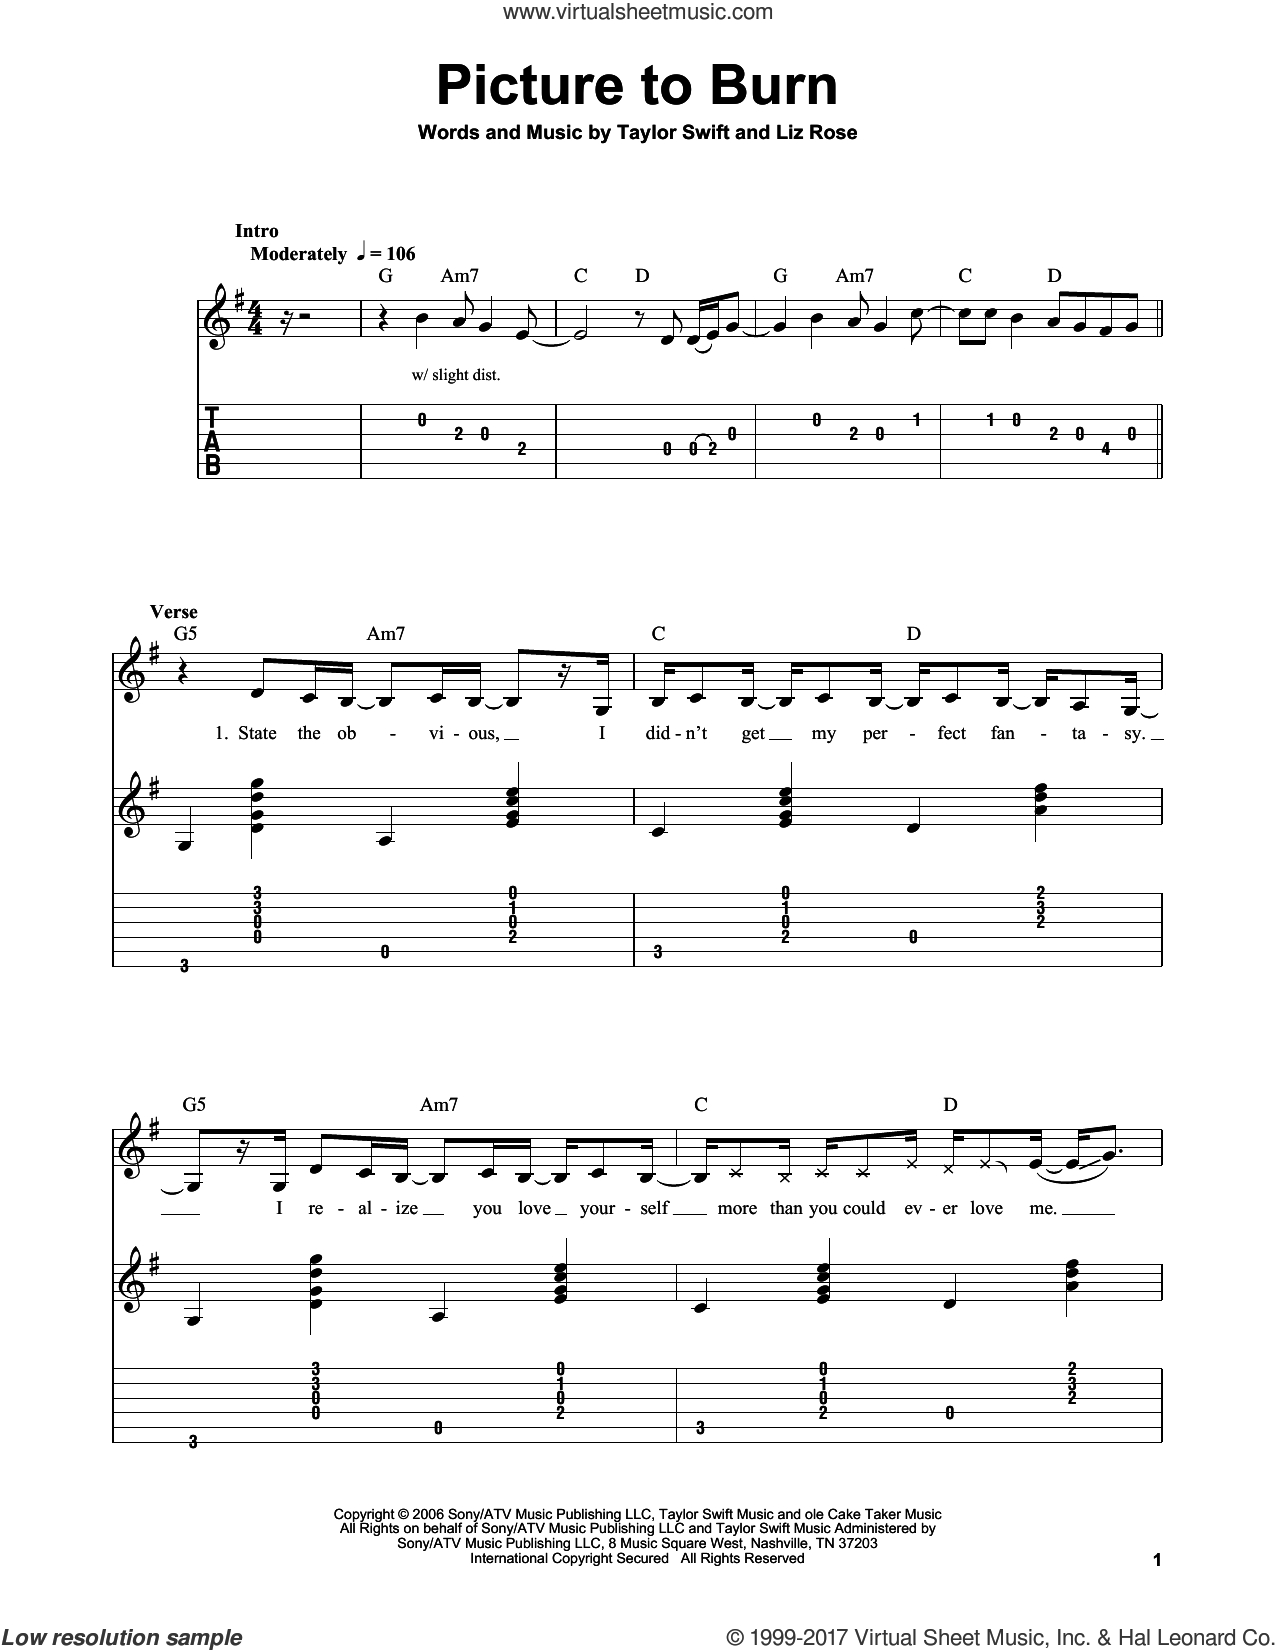 Swift - Picture To Burn Sheet Music For Guitar Solo (Easy Tablature) - Taylor Swift Mine Piano Sheet Music Free Printable